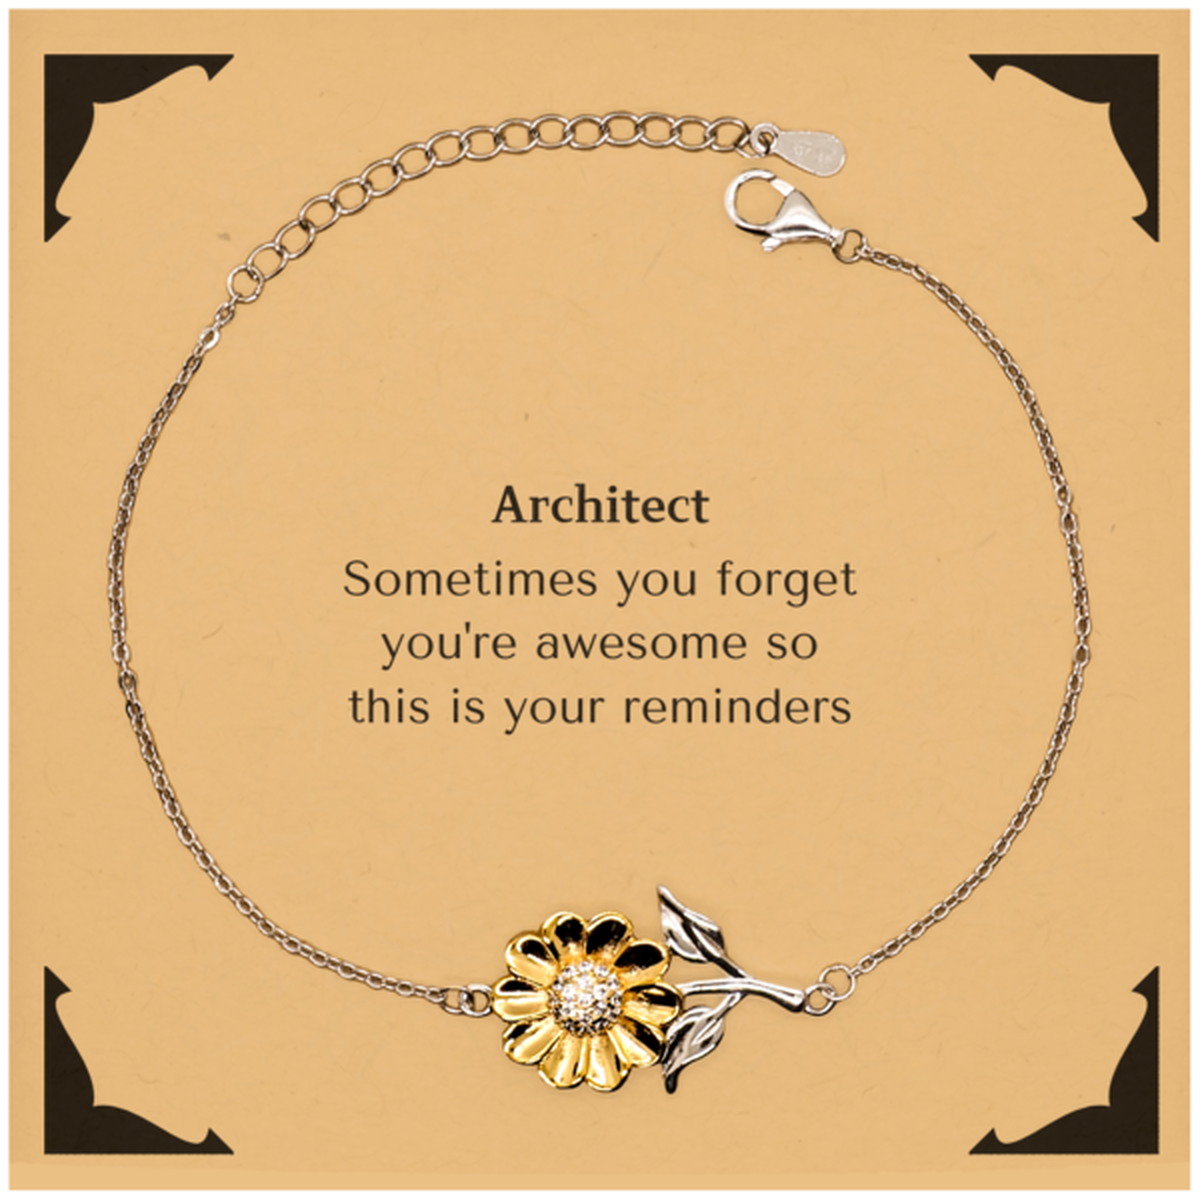 Sentimental Architect Sunflower Bracelet, Architect Sometimes you forget you're awesome so this is your reminders, Graduation Christmas Birthday Gifts for Architect, Men, Women, Coworkers